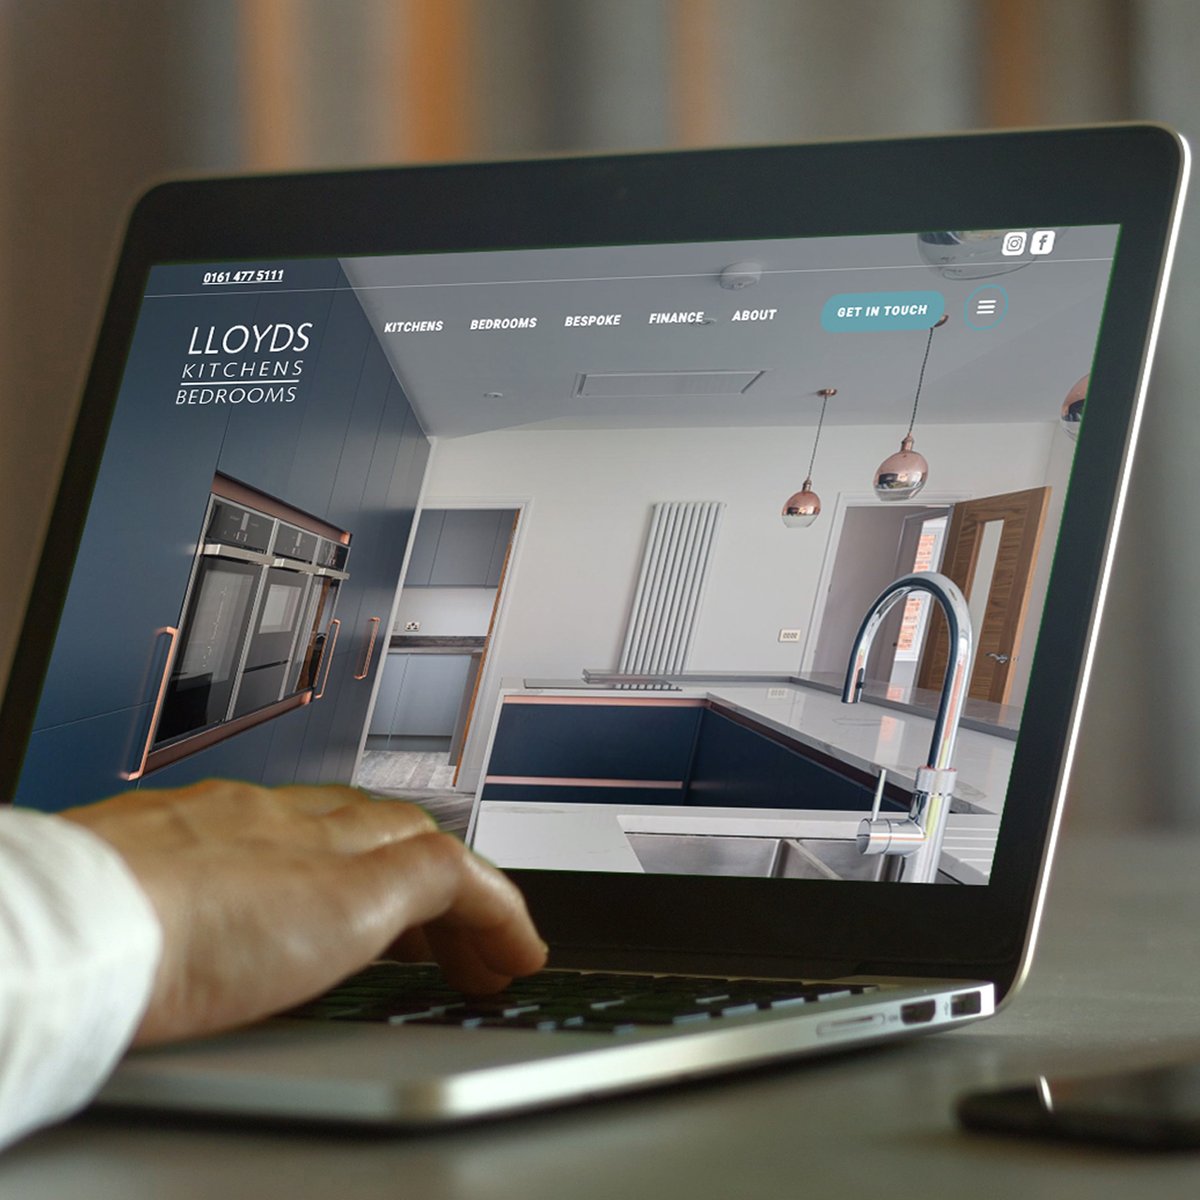 With over three decades of experience, they have established themselves as the premier independent providers and installers of kitchens and bedrooms. Initially, our objective was to establish a web presence for Lloyds, as they didn't have any way of marketing themselves.